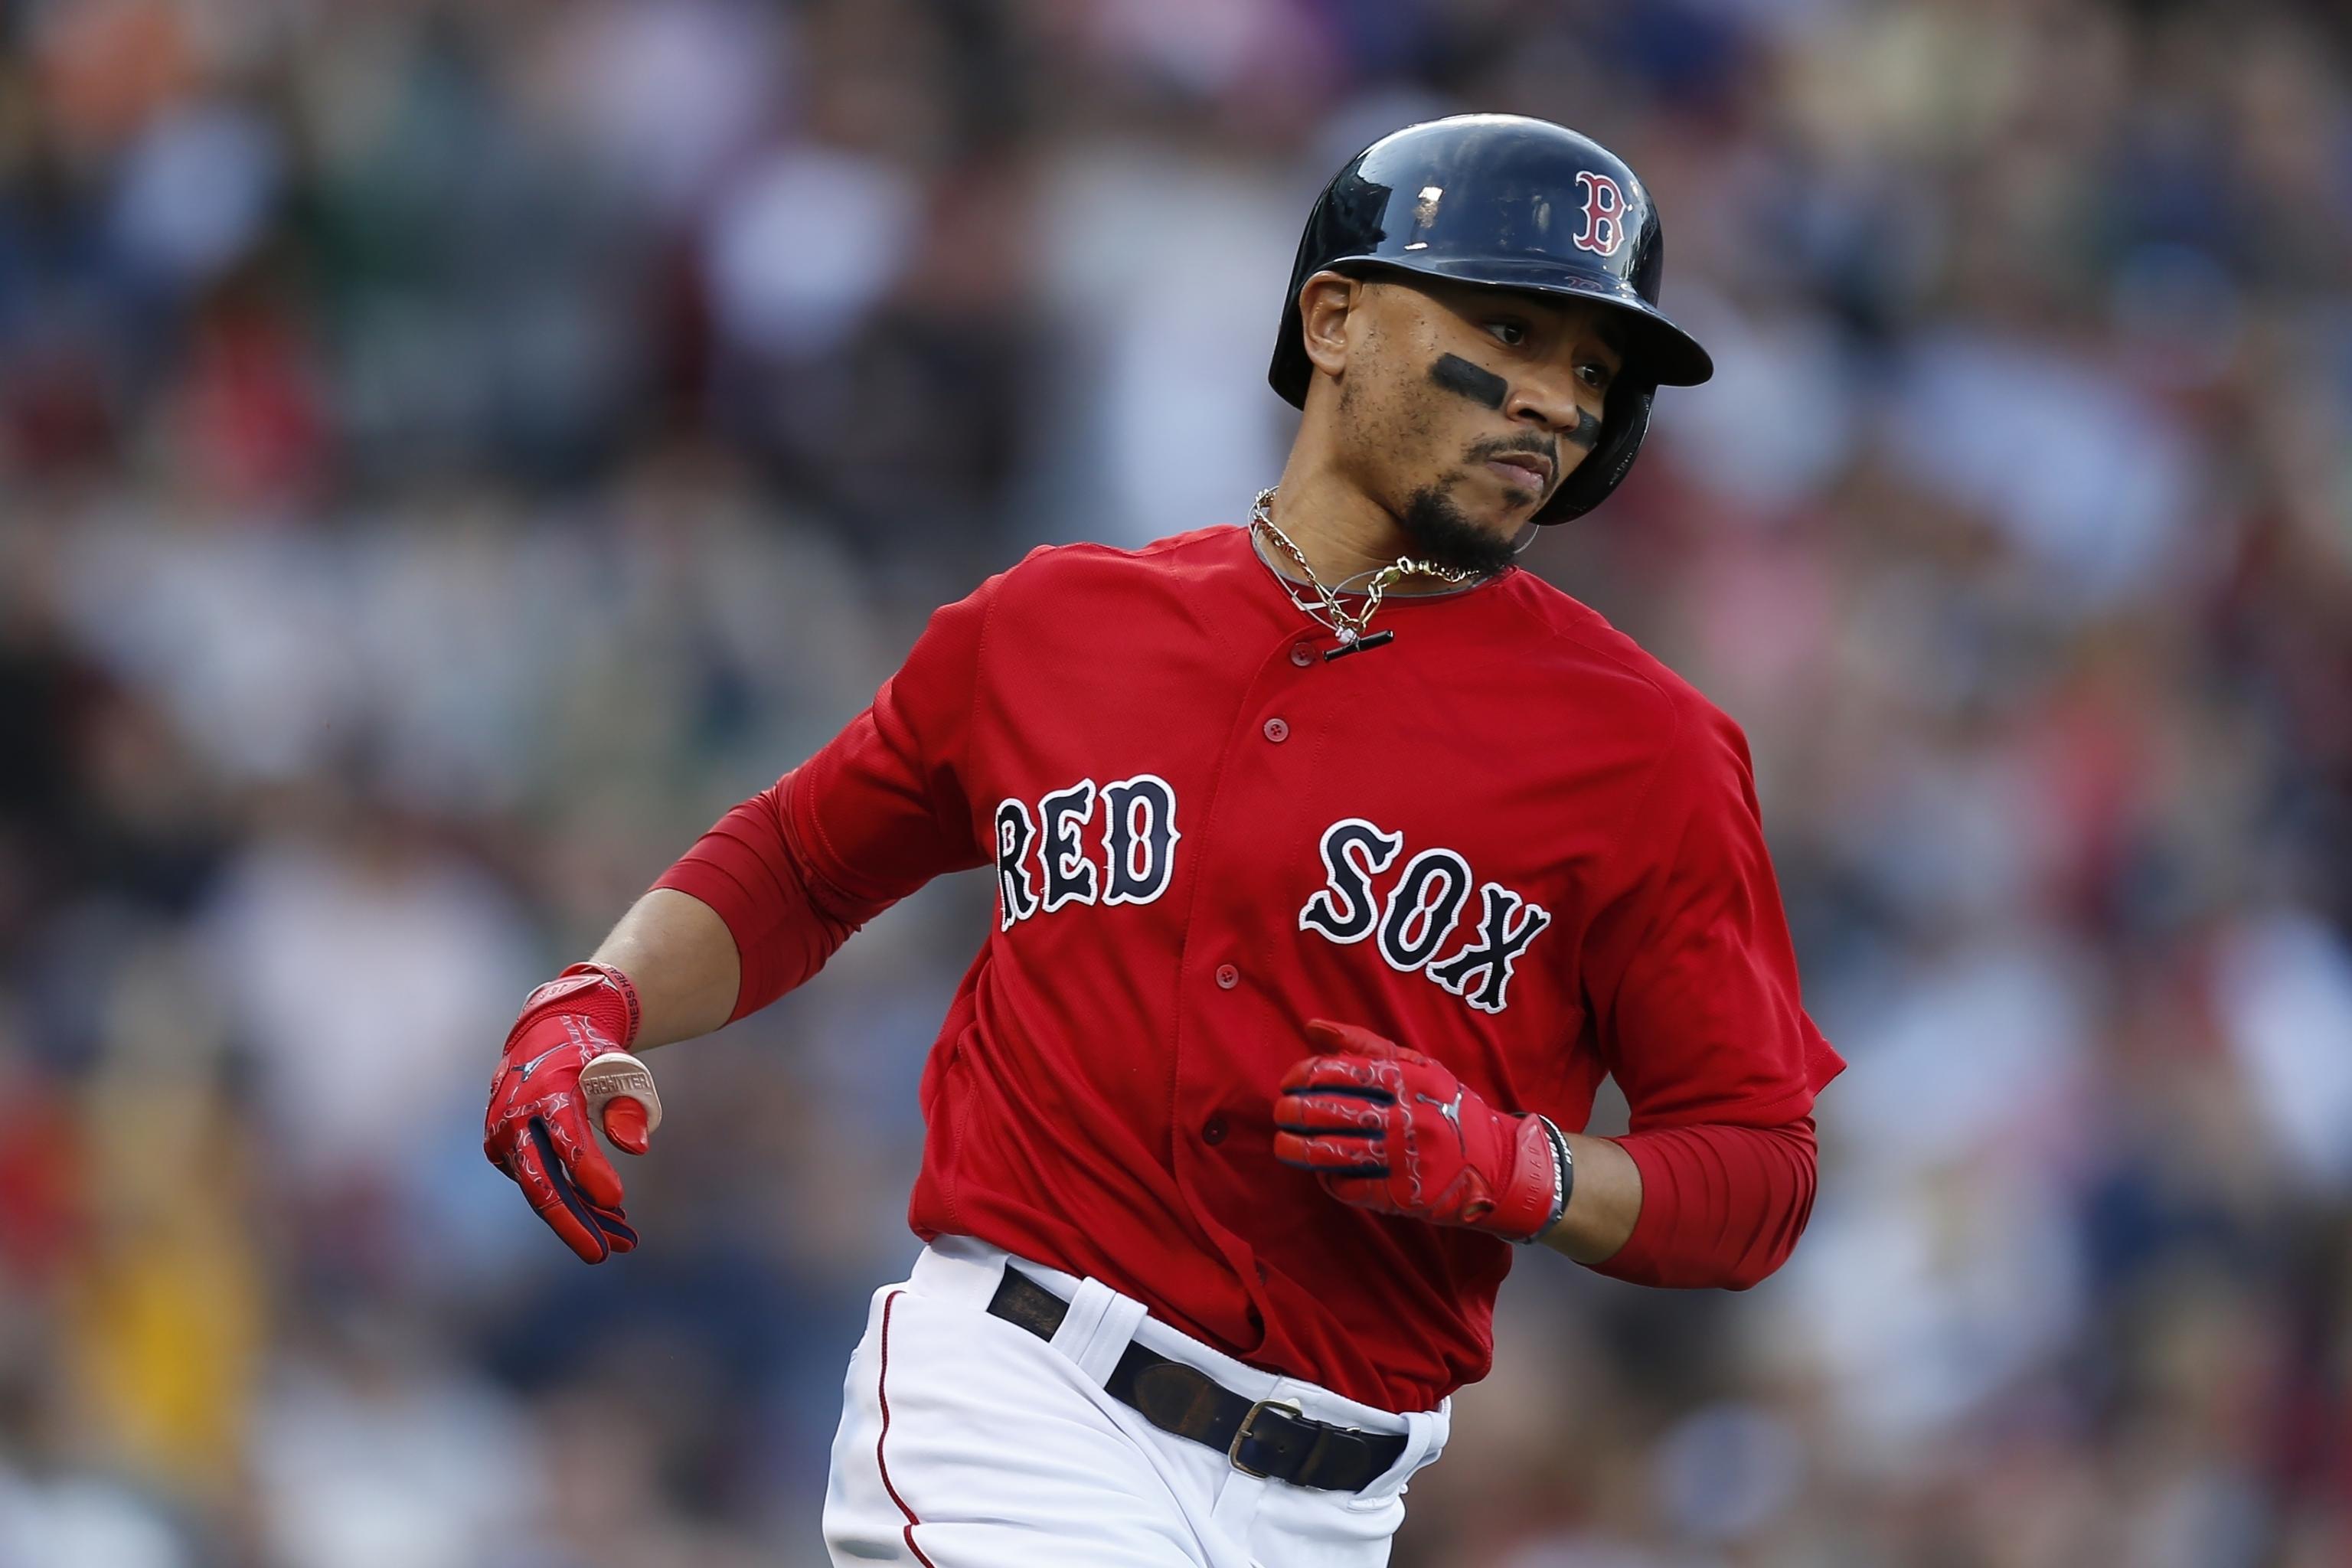 Red Sox outfielder Mookie Betts catches Gold once again - The